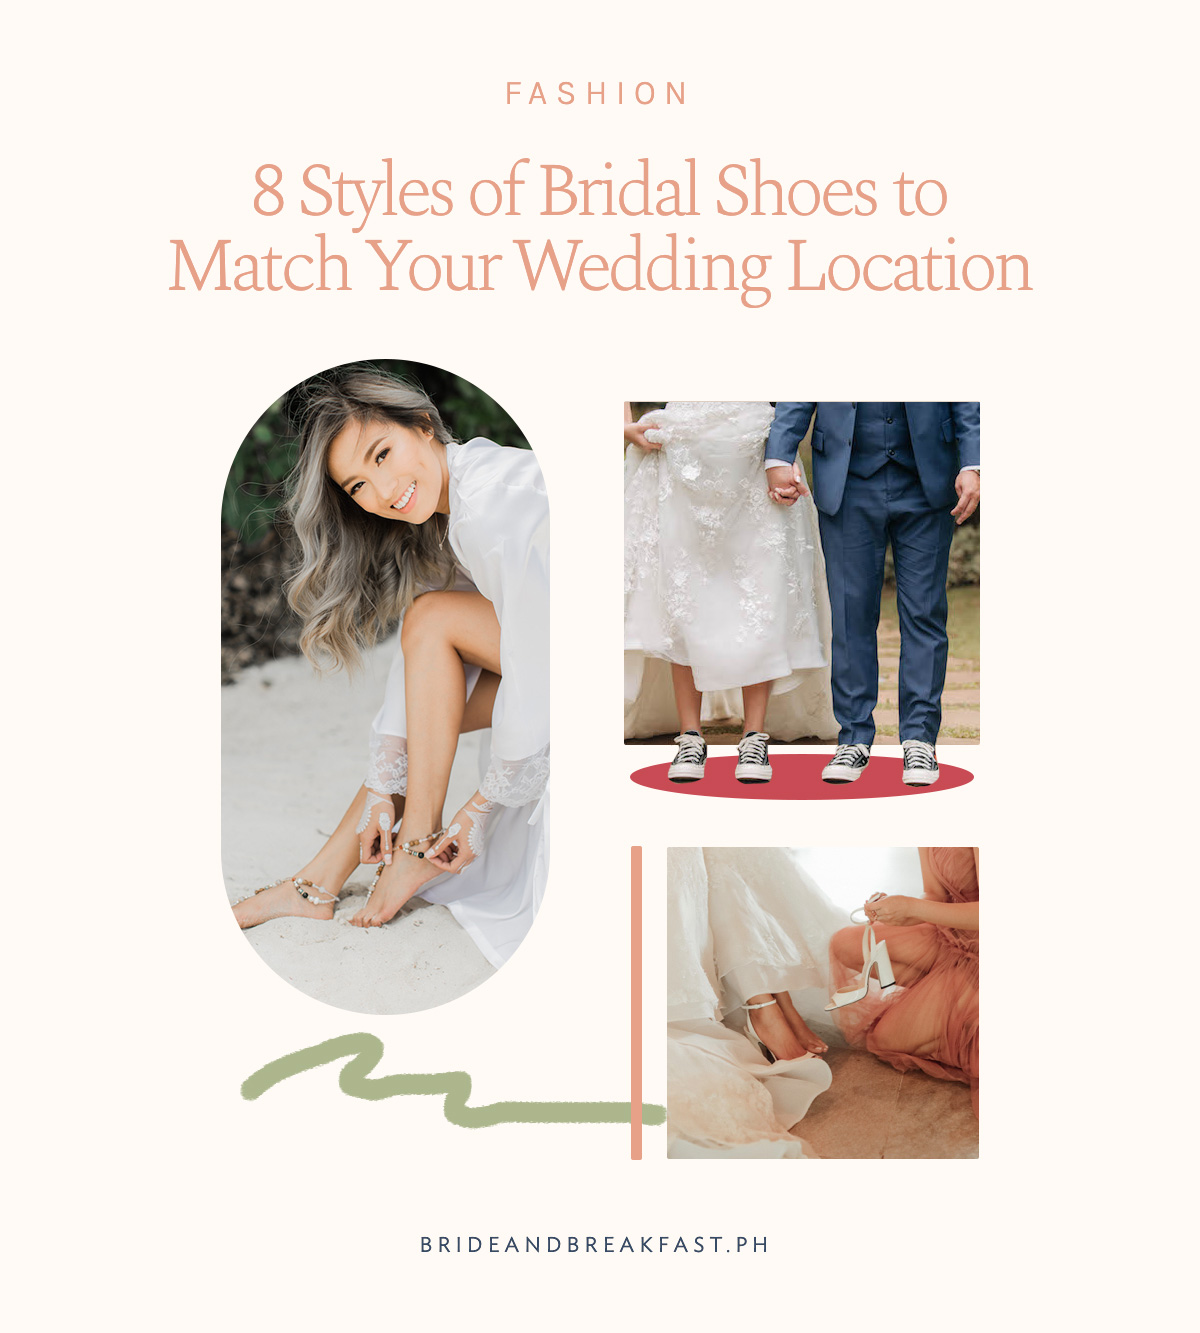 8 Styles of Bridal Shoes to Match Your Wedding Location